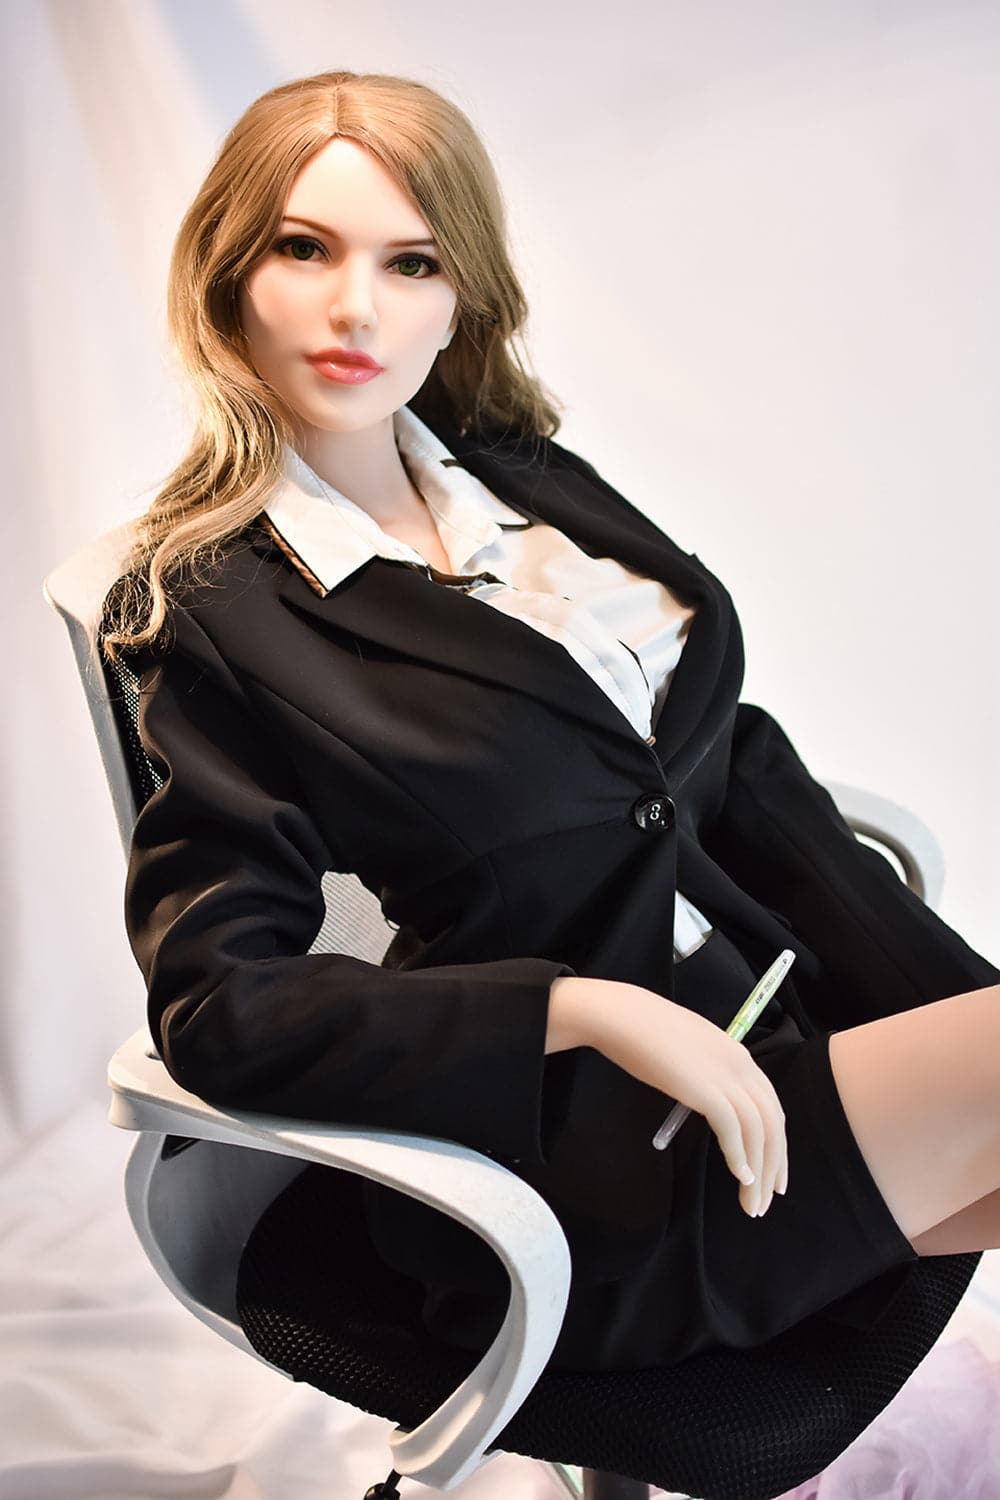 EU In Stock - 165cm/5ft5 F-Cup Hot Realistic Sex Doll